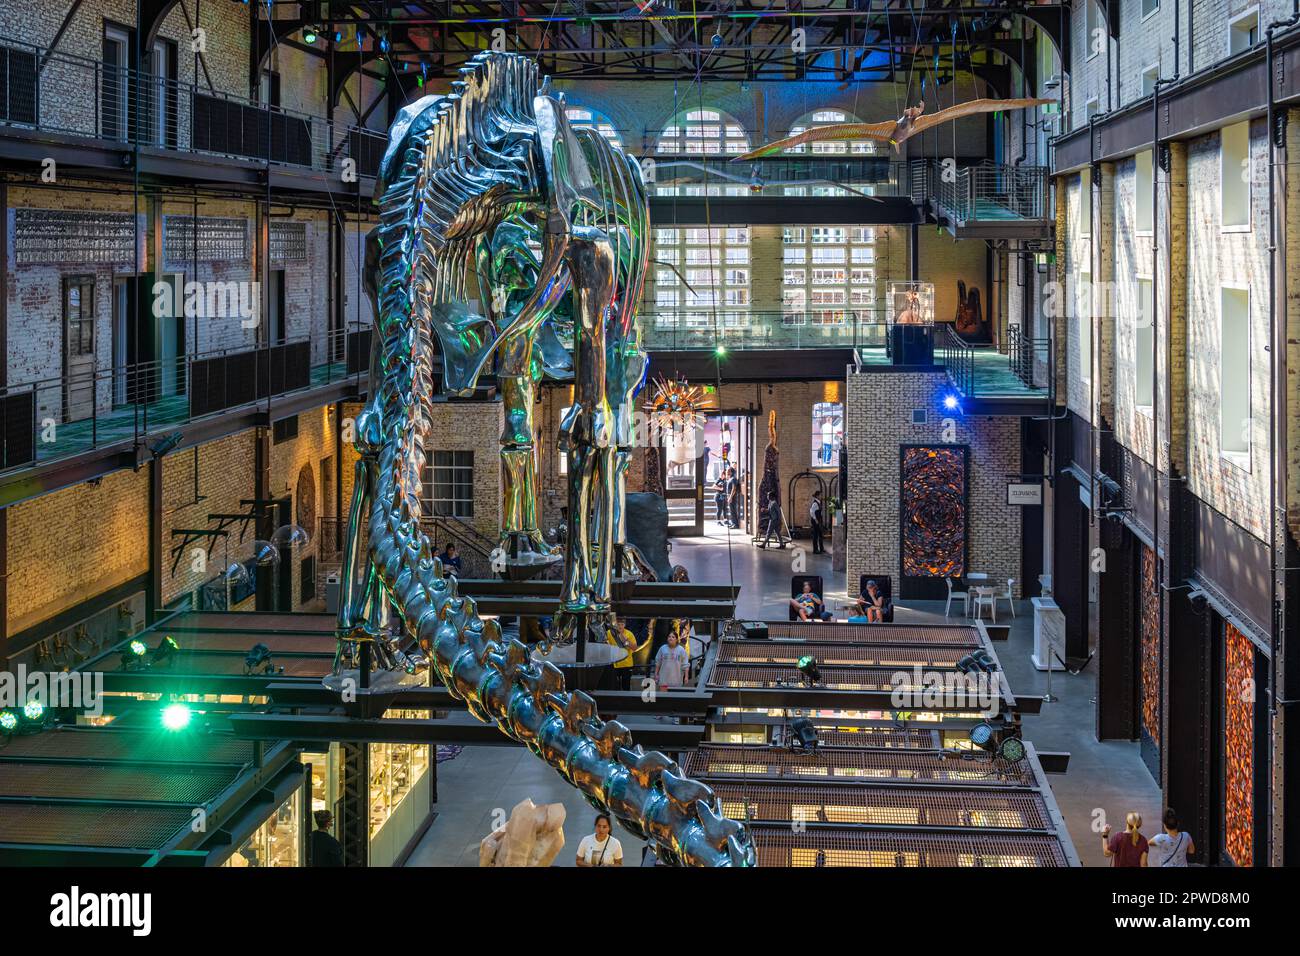 Life-size chrome dinosaur skeleton and giant geode in the lobby of the JW Marriott Savannah Plant Riverside District hotel on the Savannah River. Stock Photo